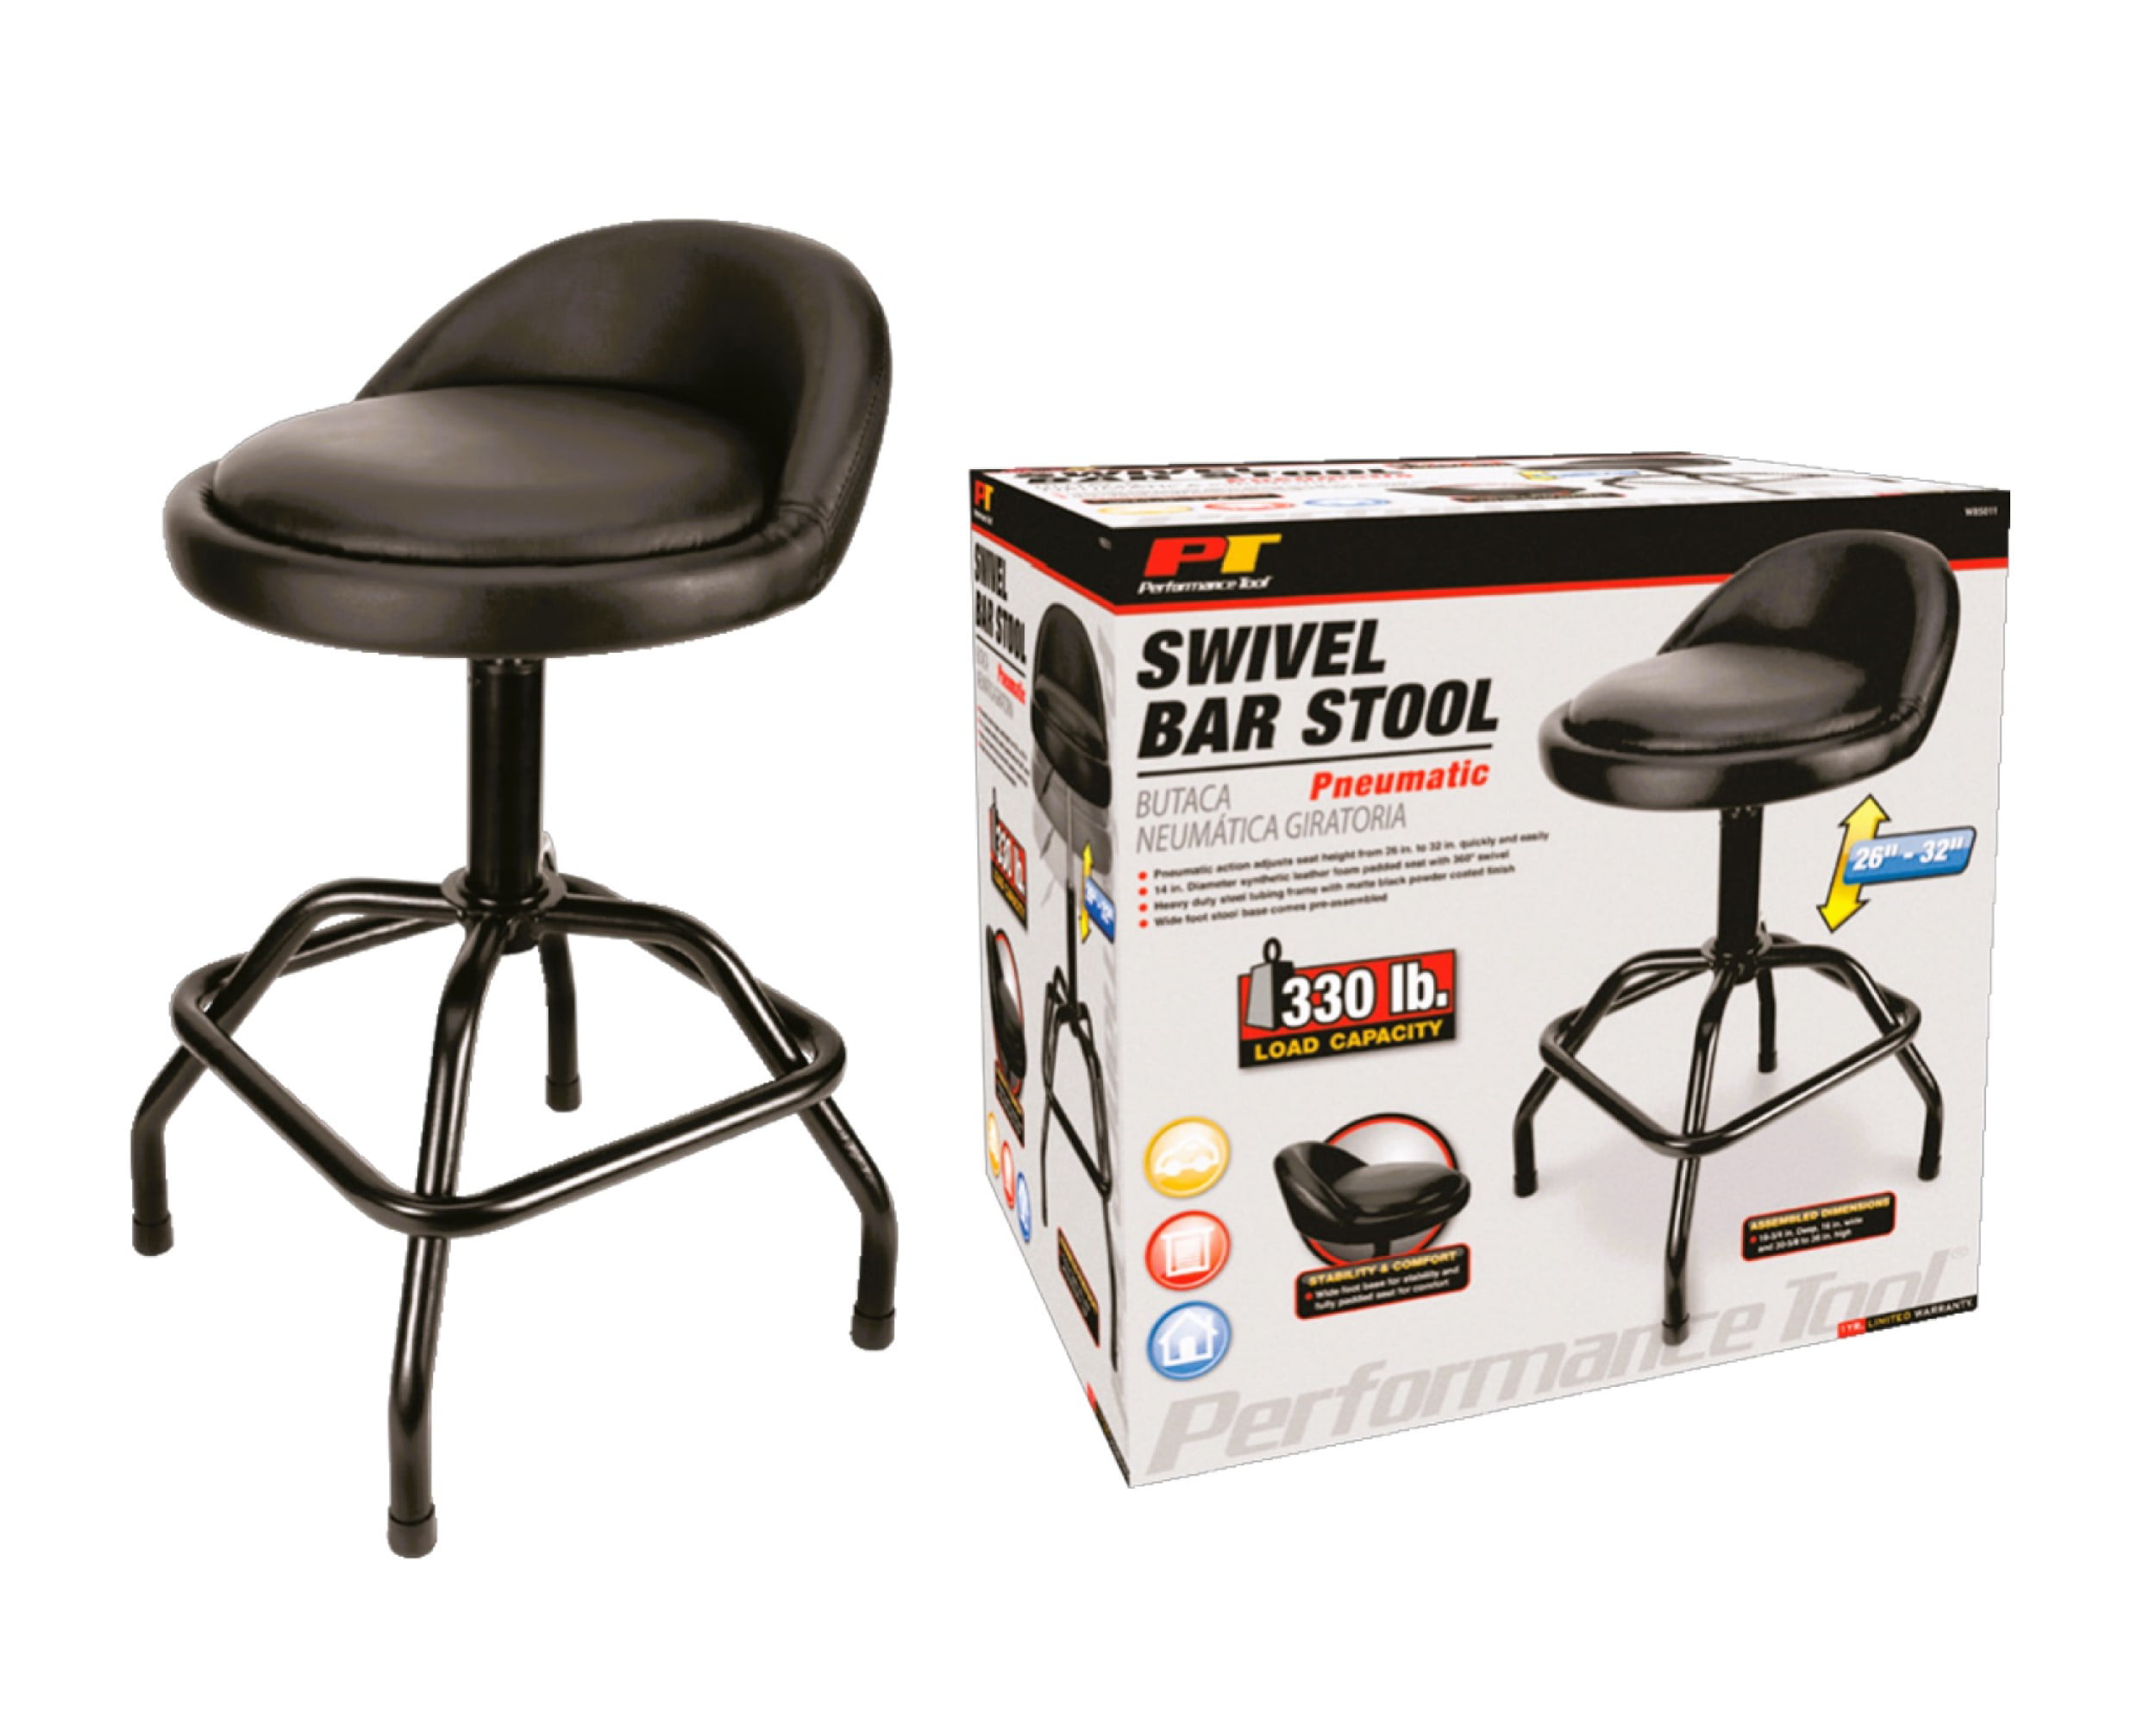 Ford Garage Stool Shop Man Cave Ideas Gifts Mechanic Seat Vehicle Accessories 